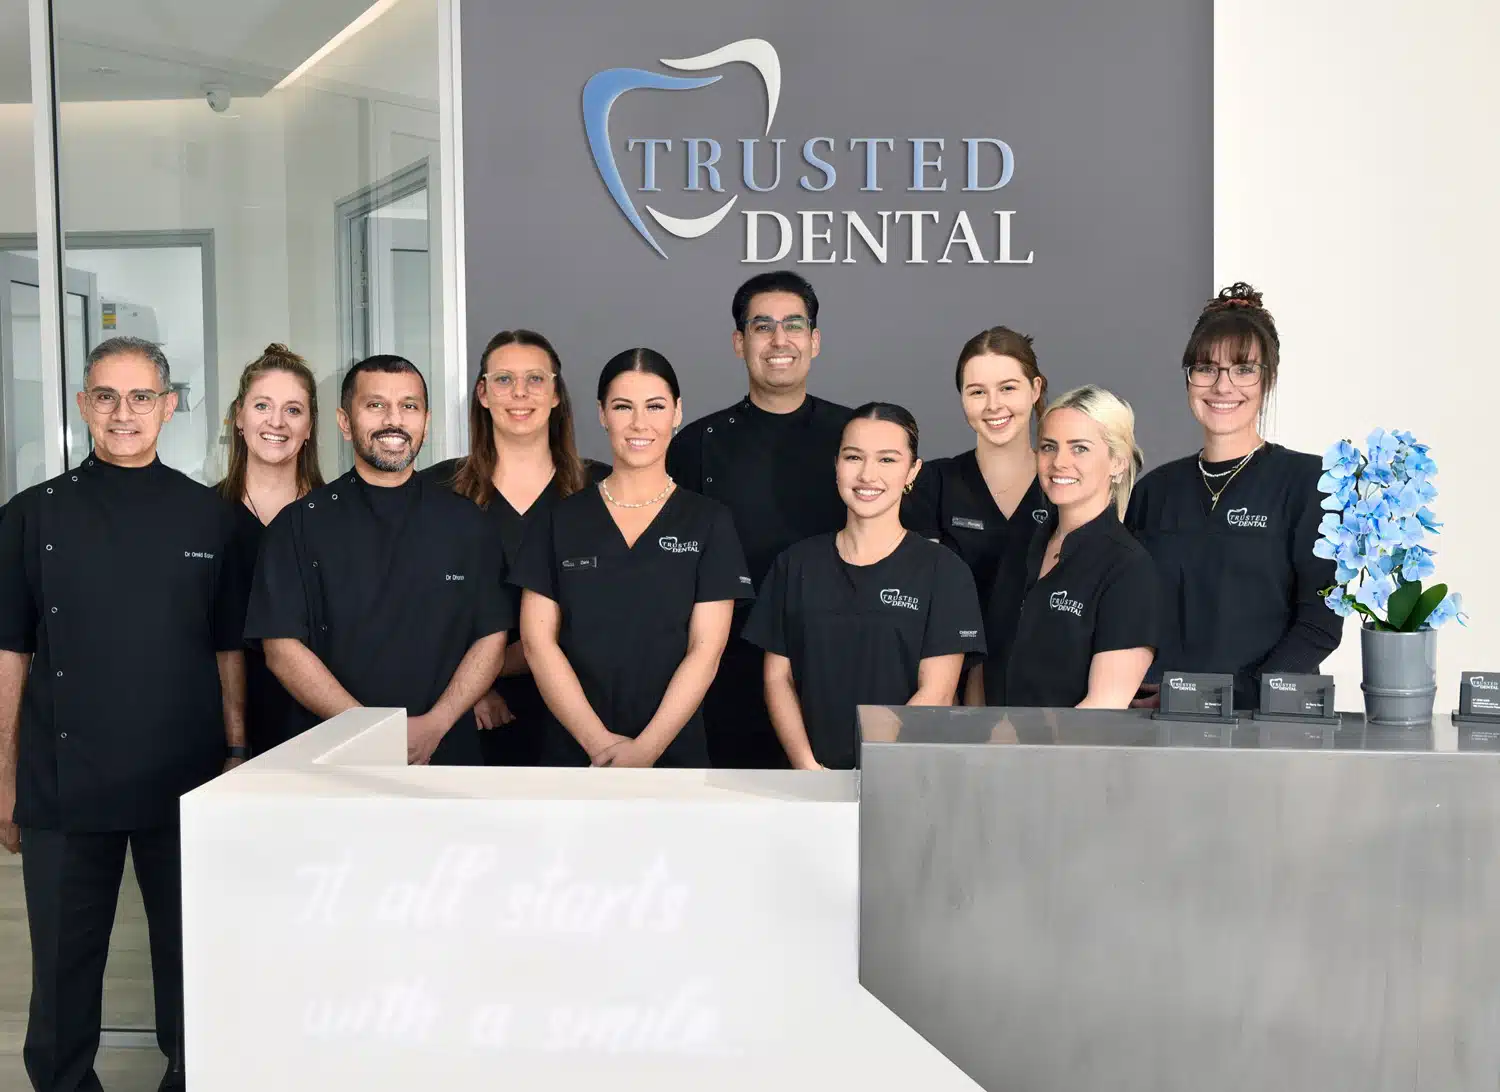 Trusted Dental Team photo in front of logo